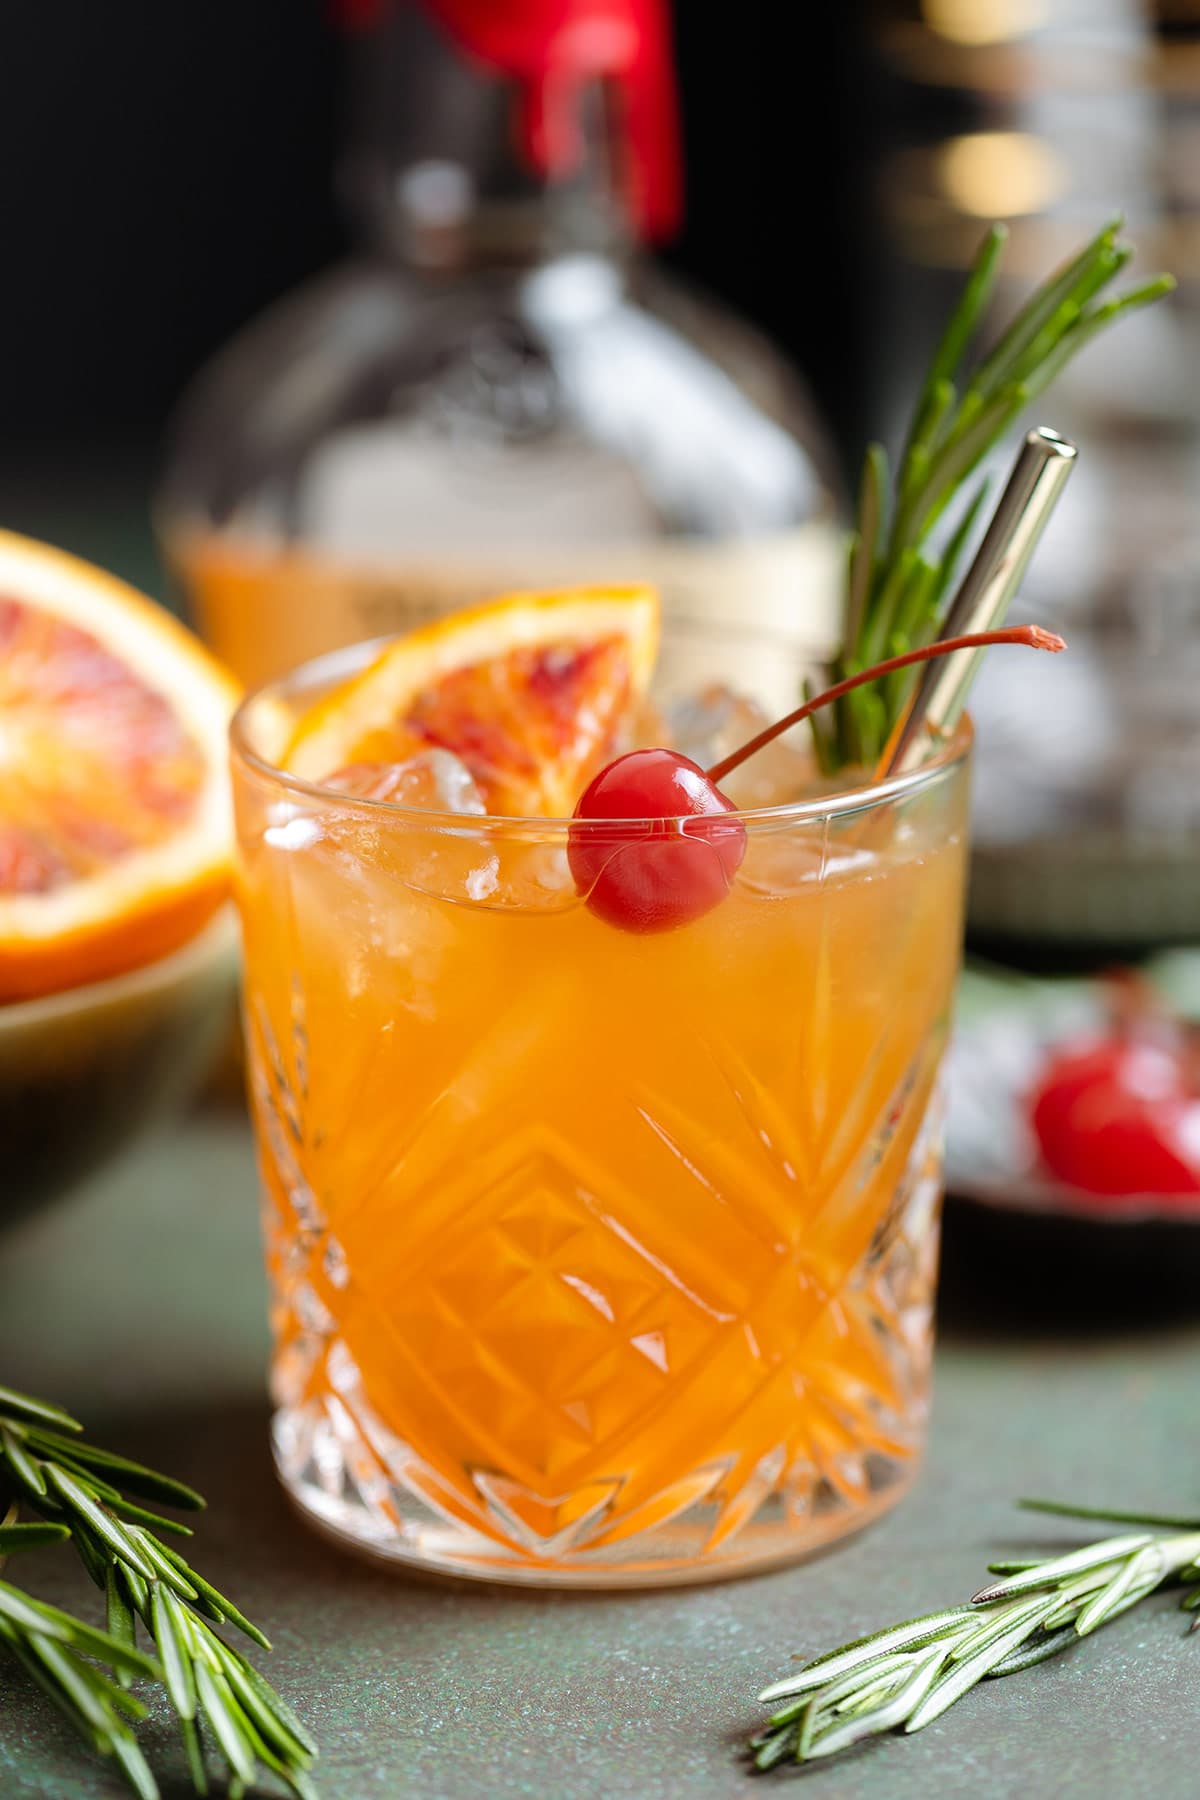 Orange old fashioned in a short glass garnished with a cherry, fresh rosemary spring, and a wedge of a blood orange.